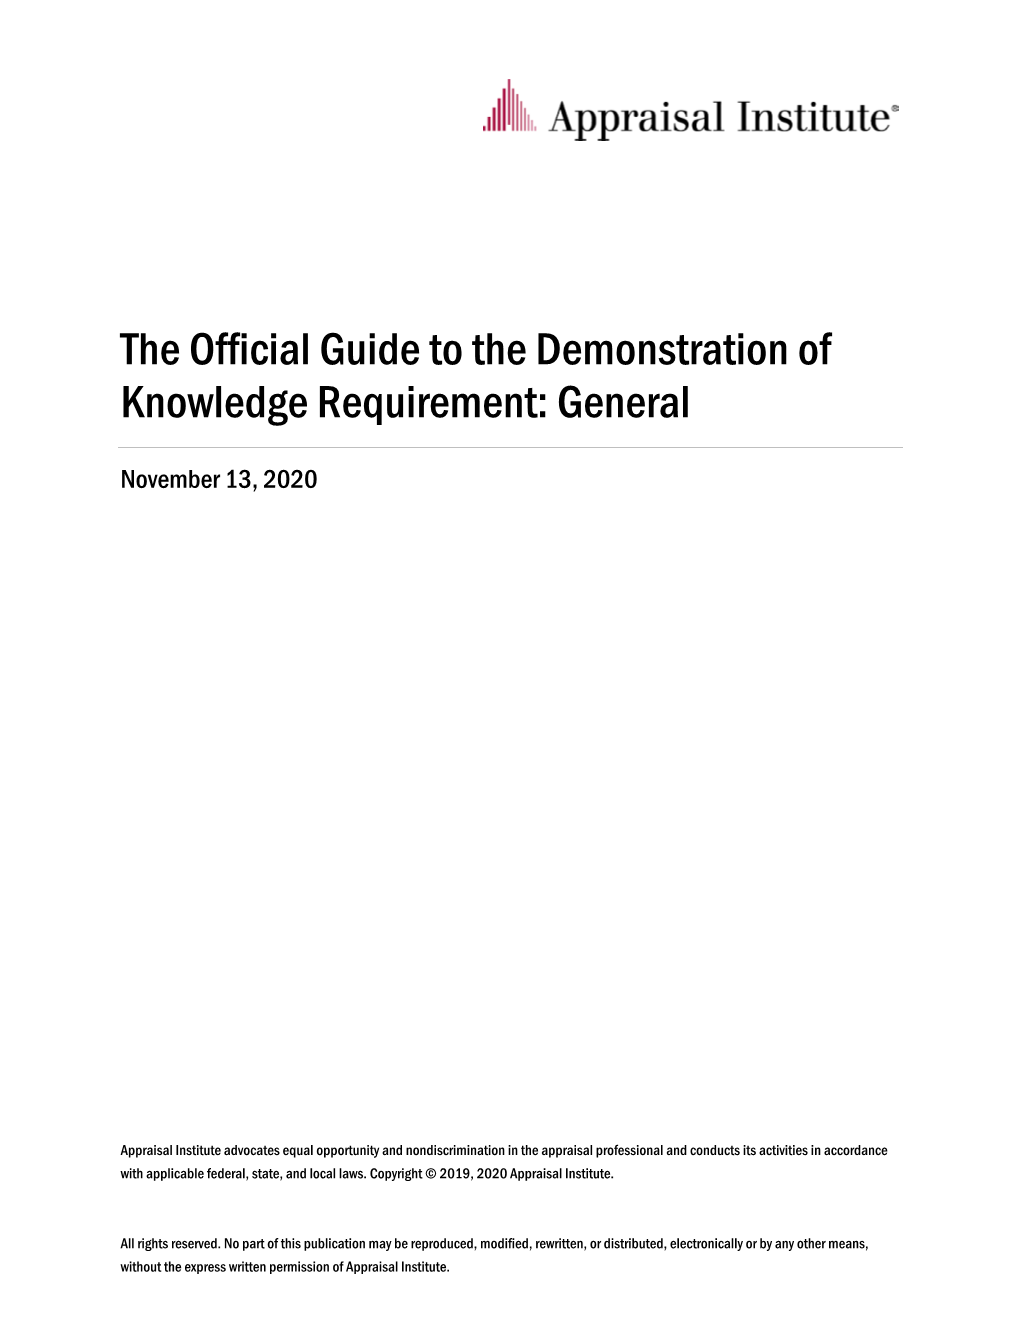 The Official Guide to the Demonstration of Knowledge Requirement: General